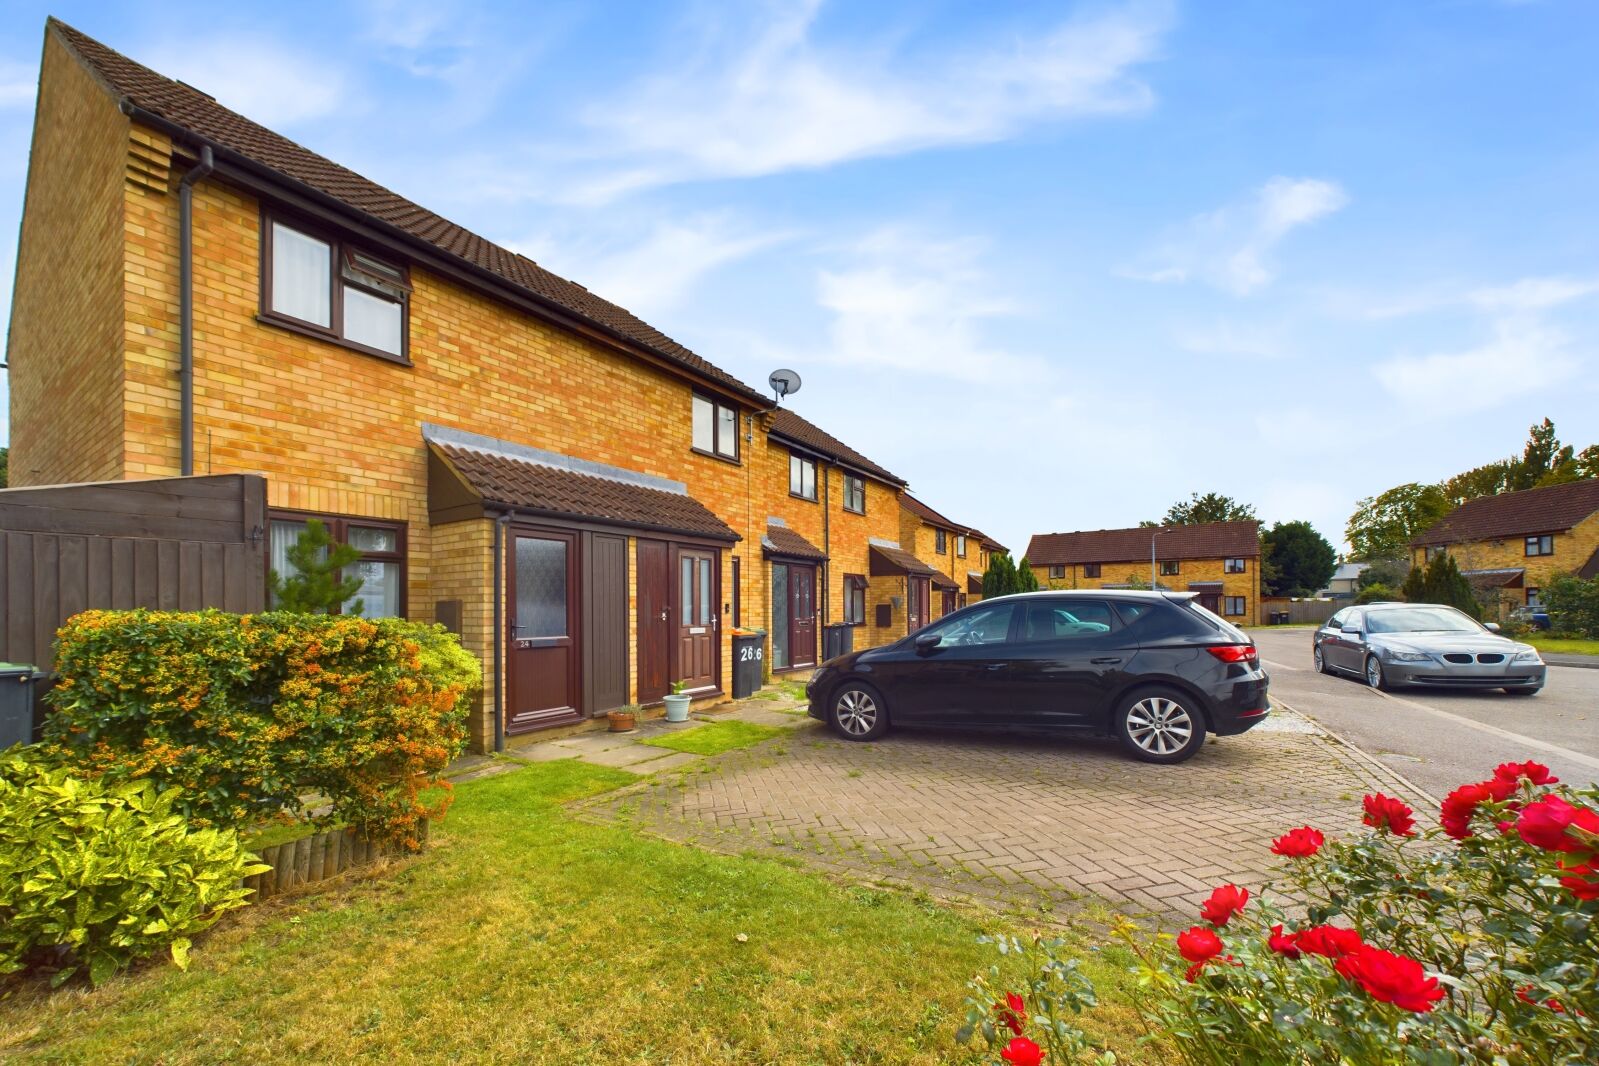 2 bedroom mid terraced house for sale Swallowfield, Wyboston, MK44, main image